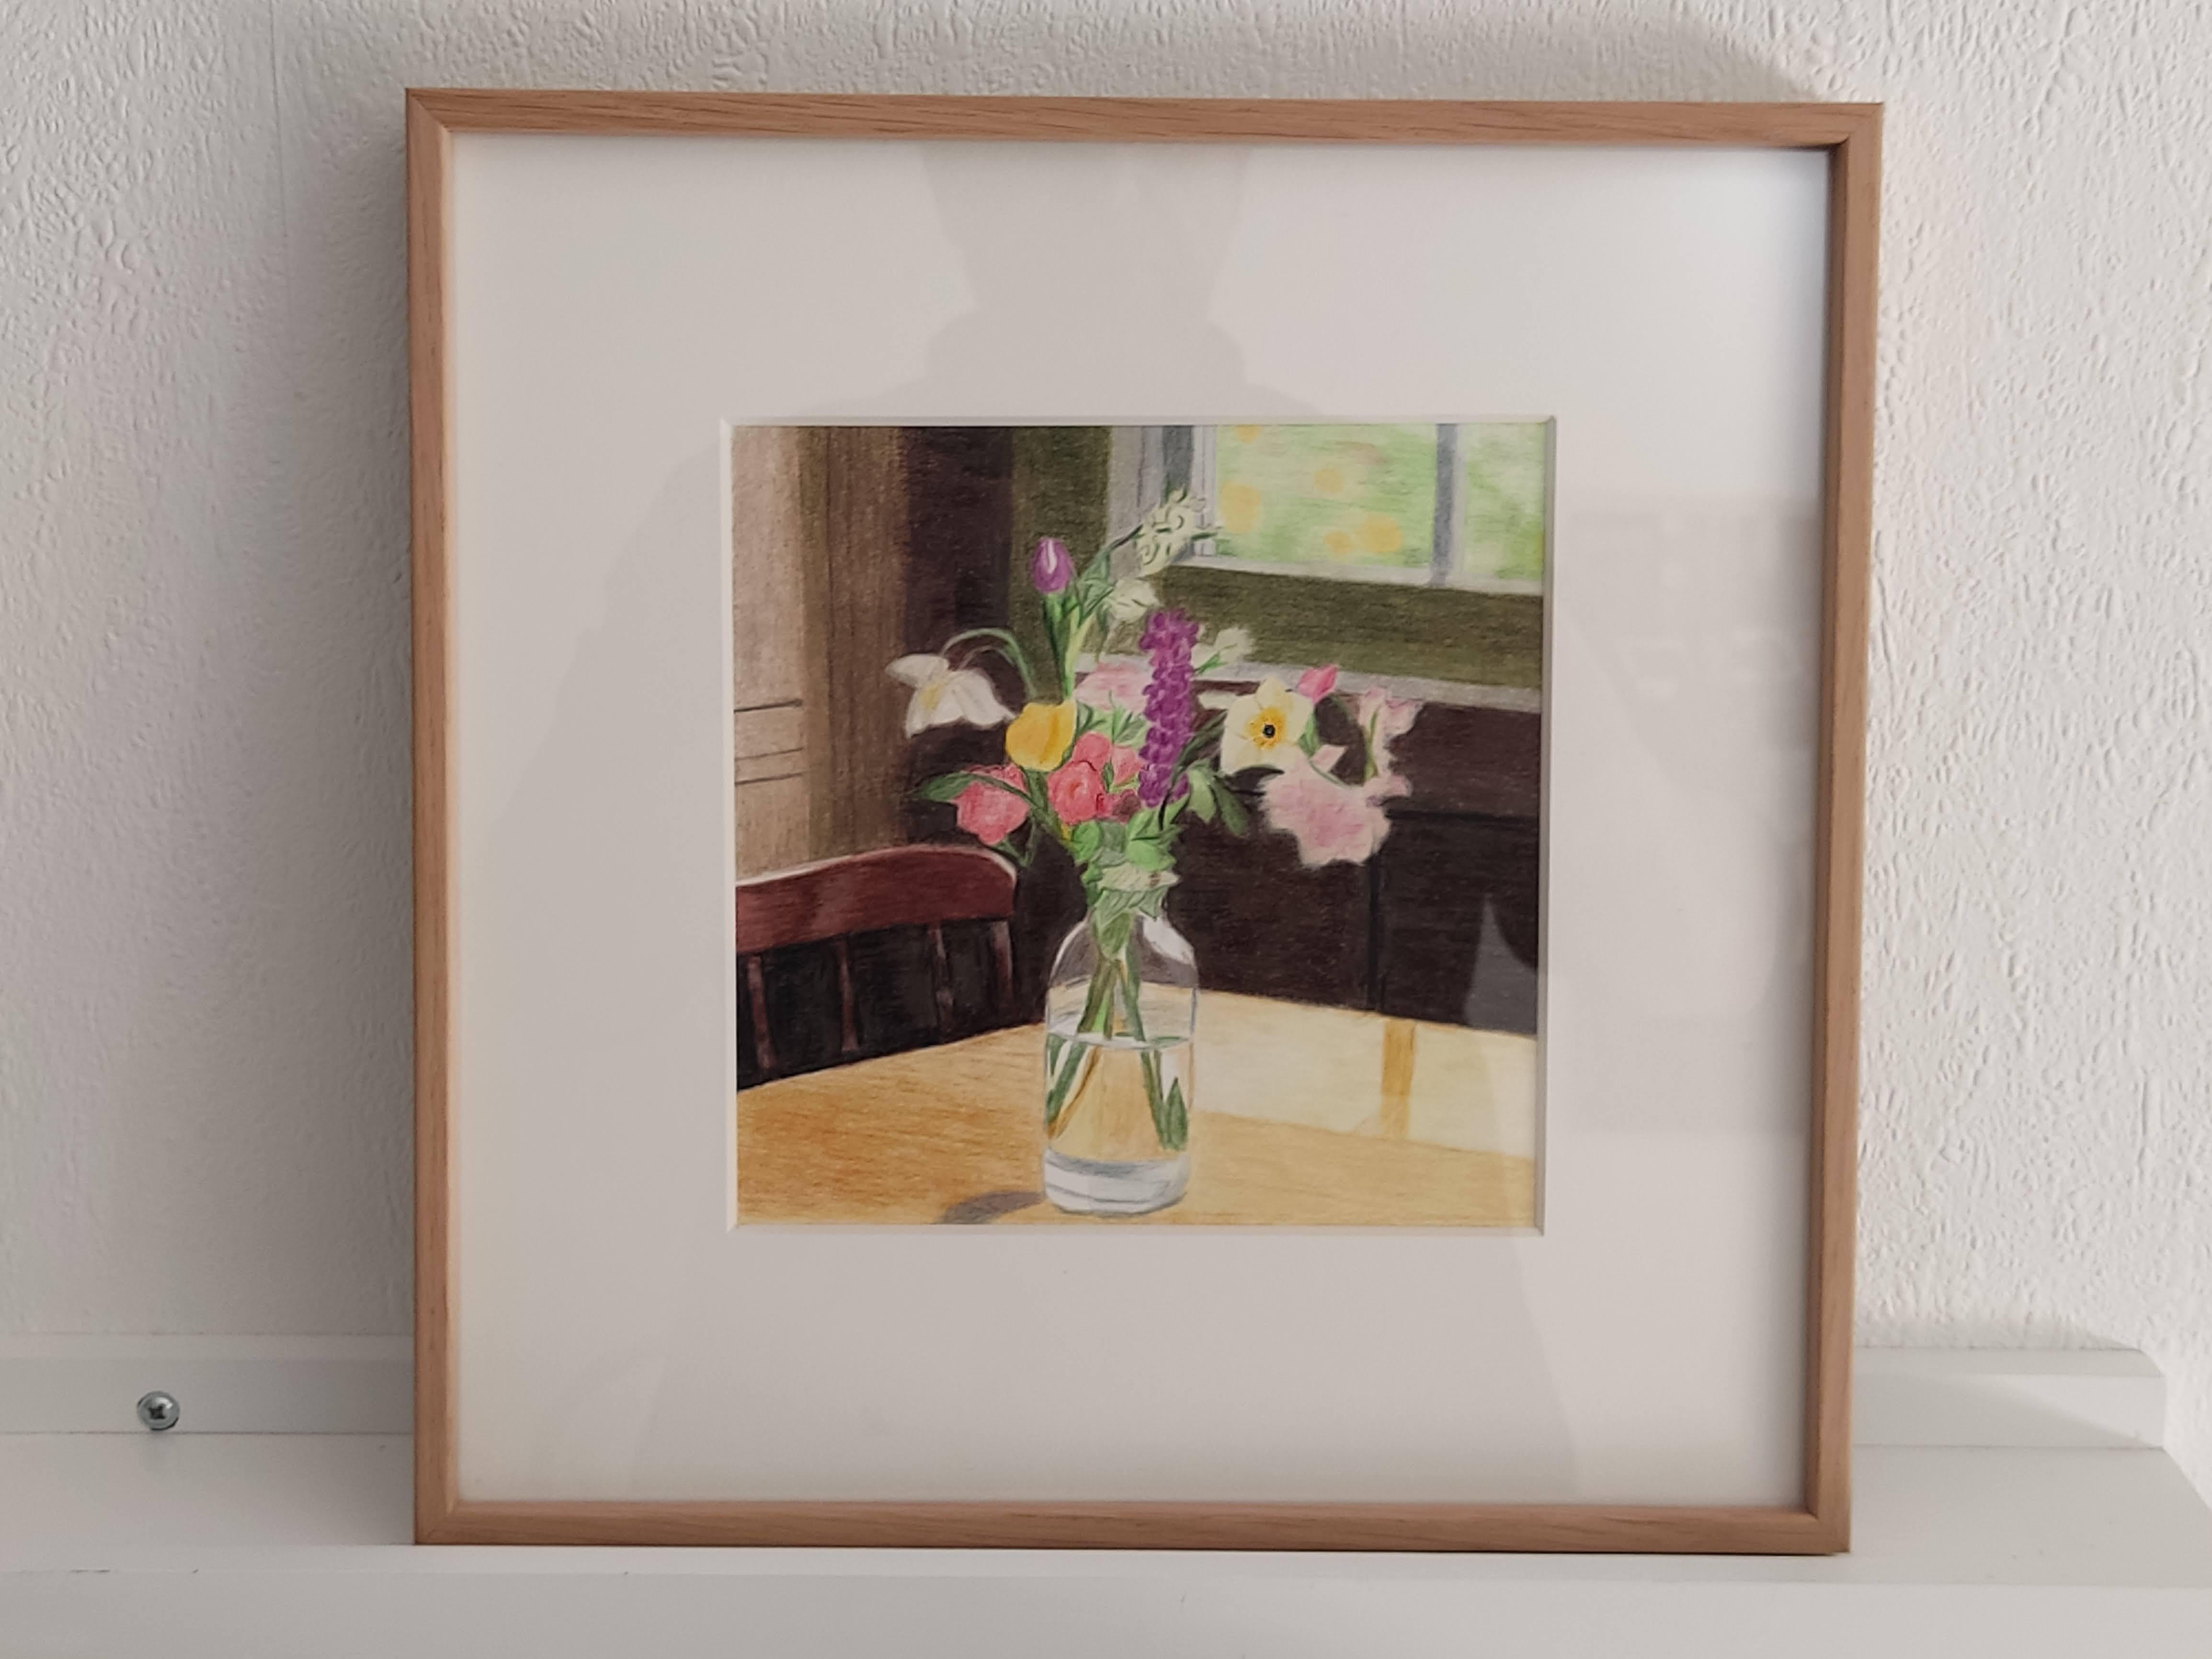 Pastel and Coloured pencils on Hahnemühle archival paper 300g - Original Drawing, Interior, Flowers
Work Title : Bouquet
Artist : Gabriel Riesnert (French artist, Born in 1970, lives and works in Paris and south of France.)
The work is signed and